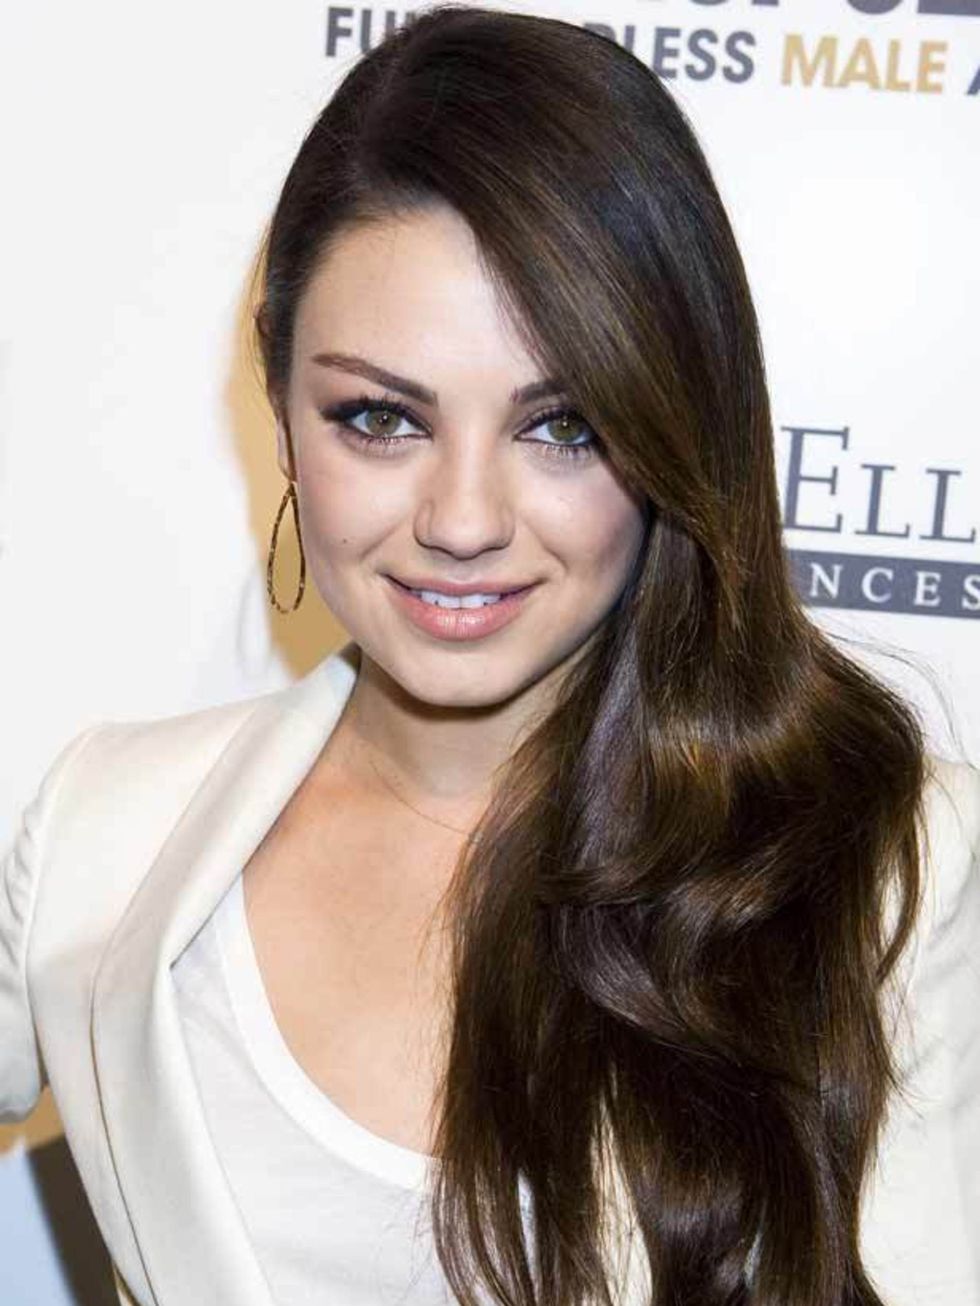 <p><a href="http://www.elleuk.com/news/Beauty-News/mila-kunis-7-000-red-carpet-facial">Read about the facial with a difference that Mila loves...</a></p>